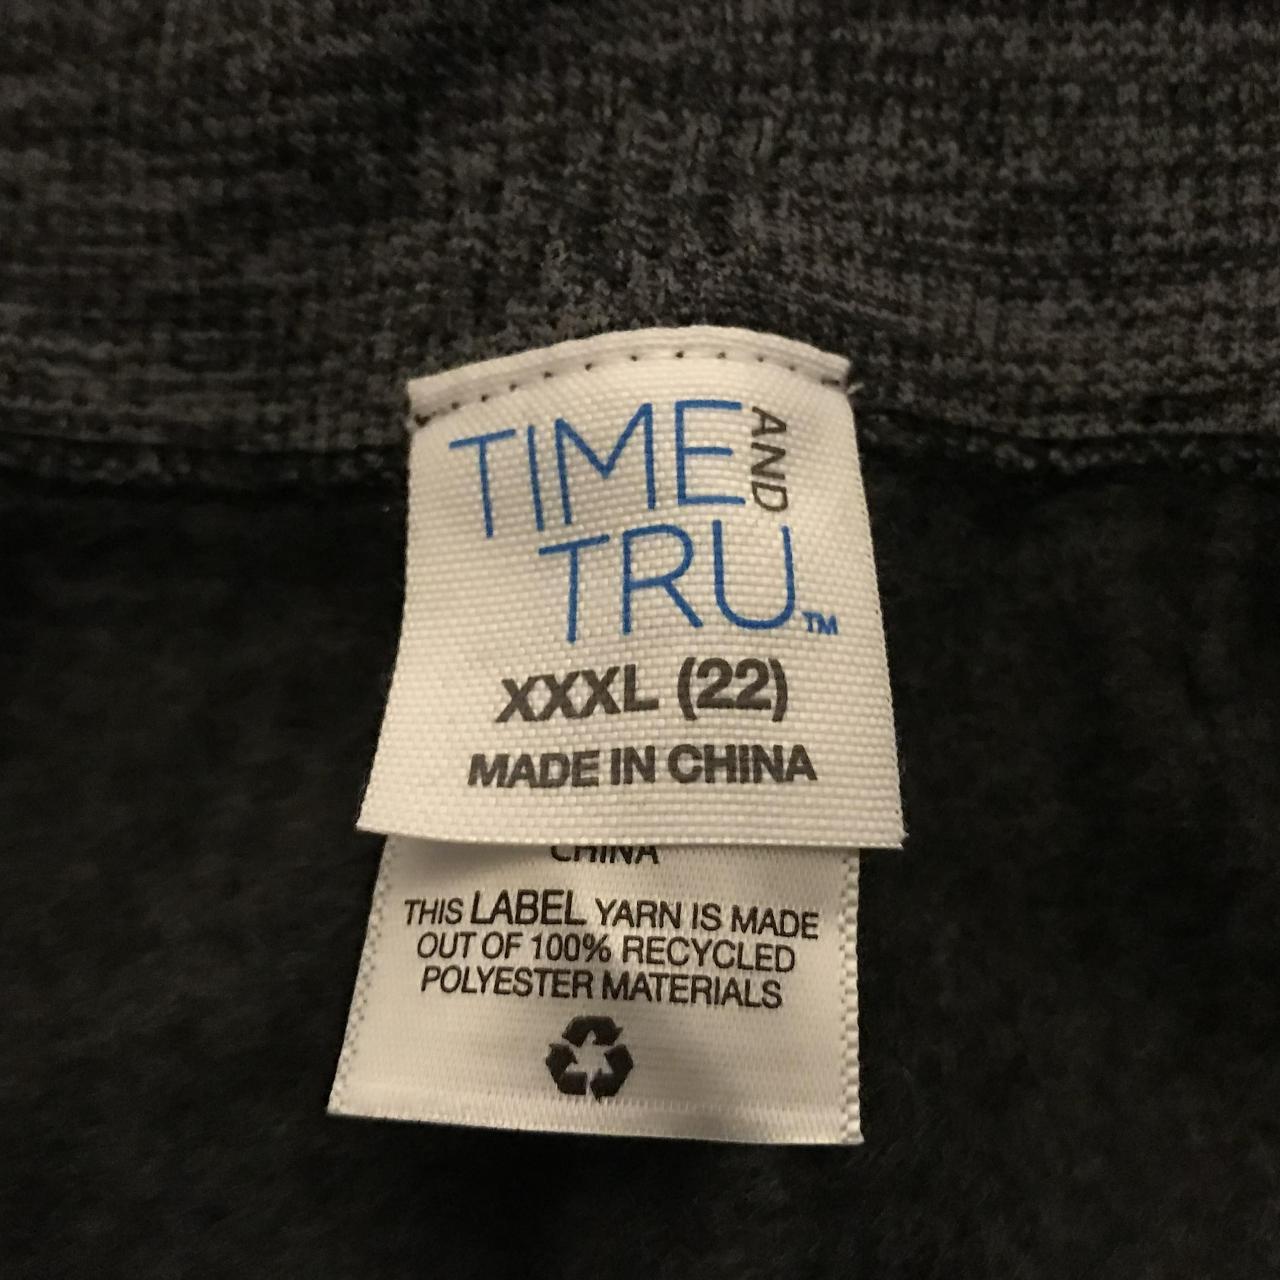 Time and Tru Gray Leggings XXXL 22 NEW! These are - Depop